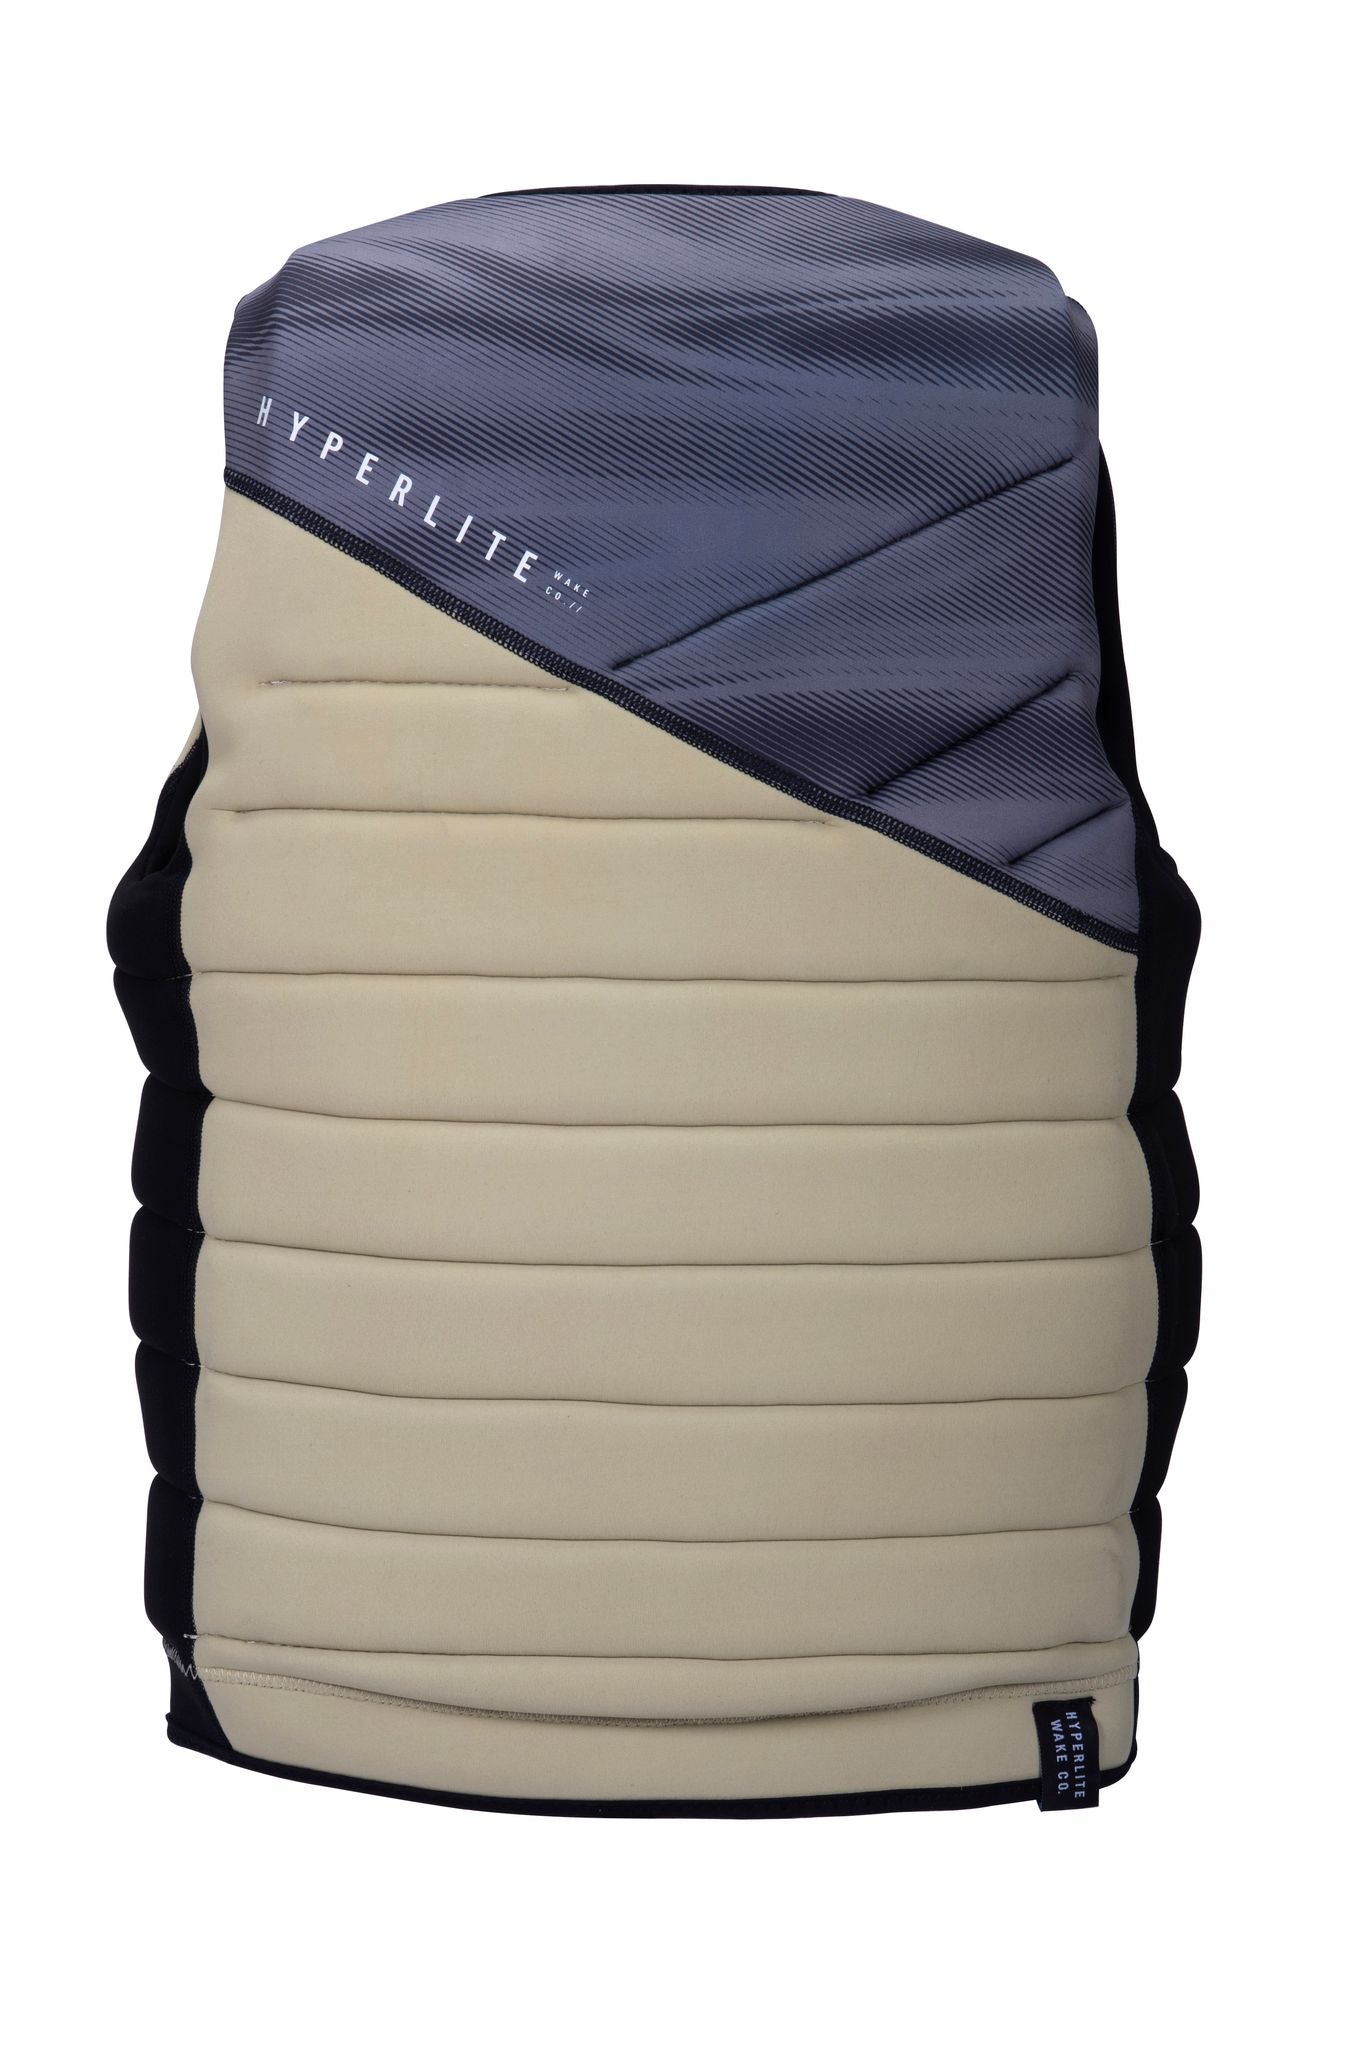 A black and beige Hyperlite life jacket with a zipper, also known as the Graeme Burress Signature Jacket.